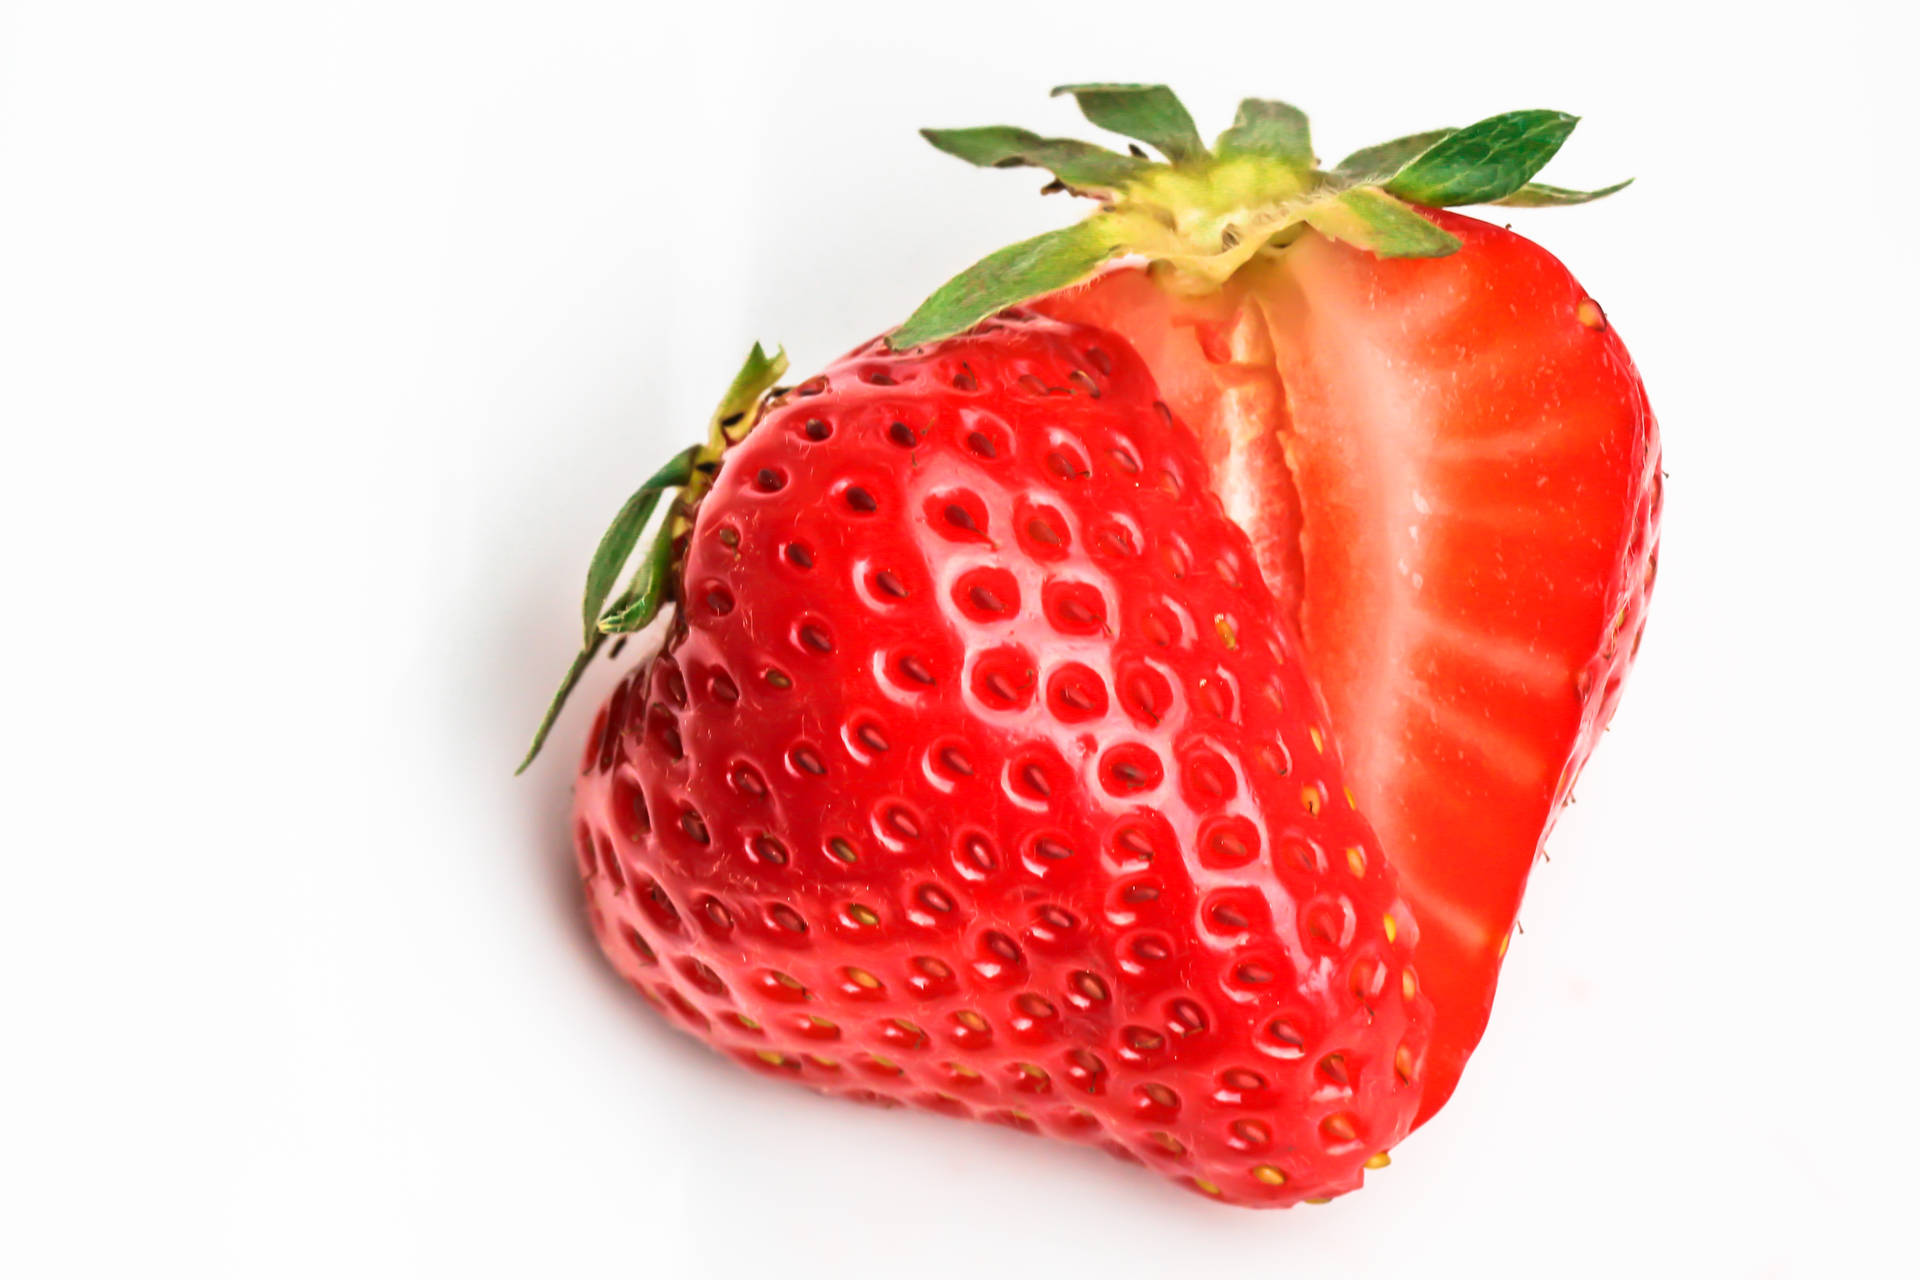 Strawberry 4355X2903 Wallpaper and Background Image